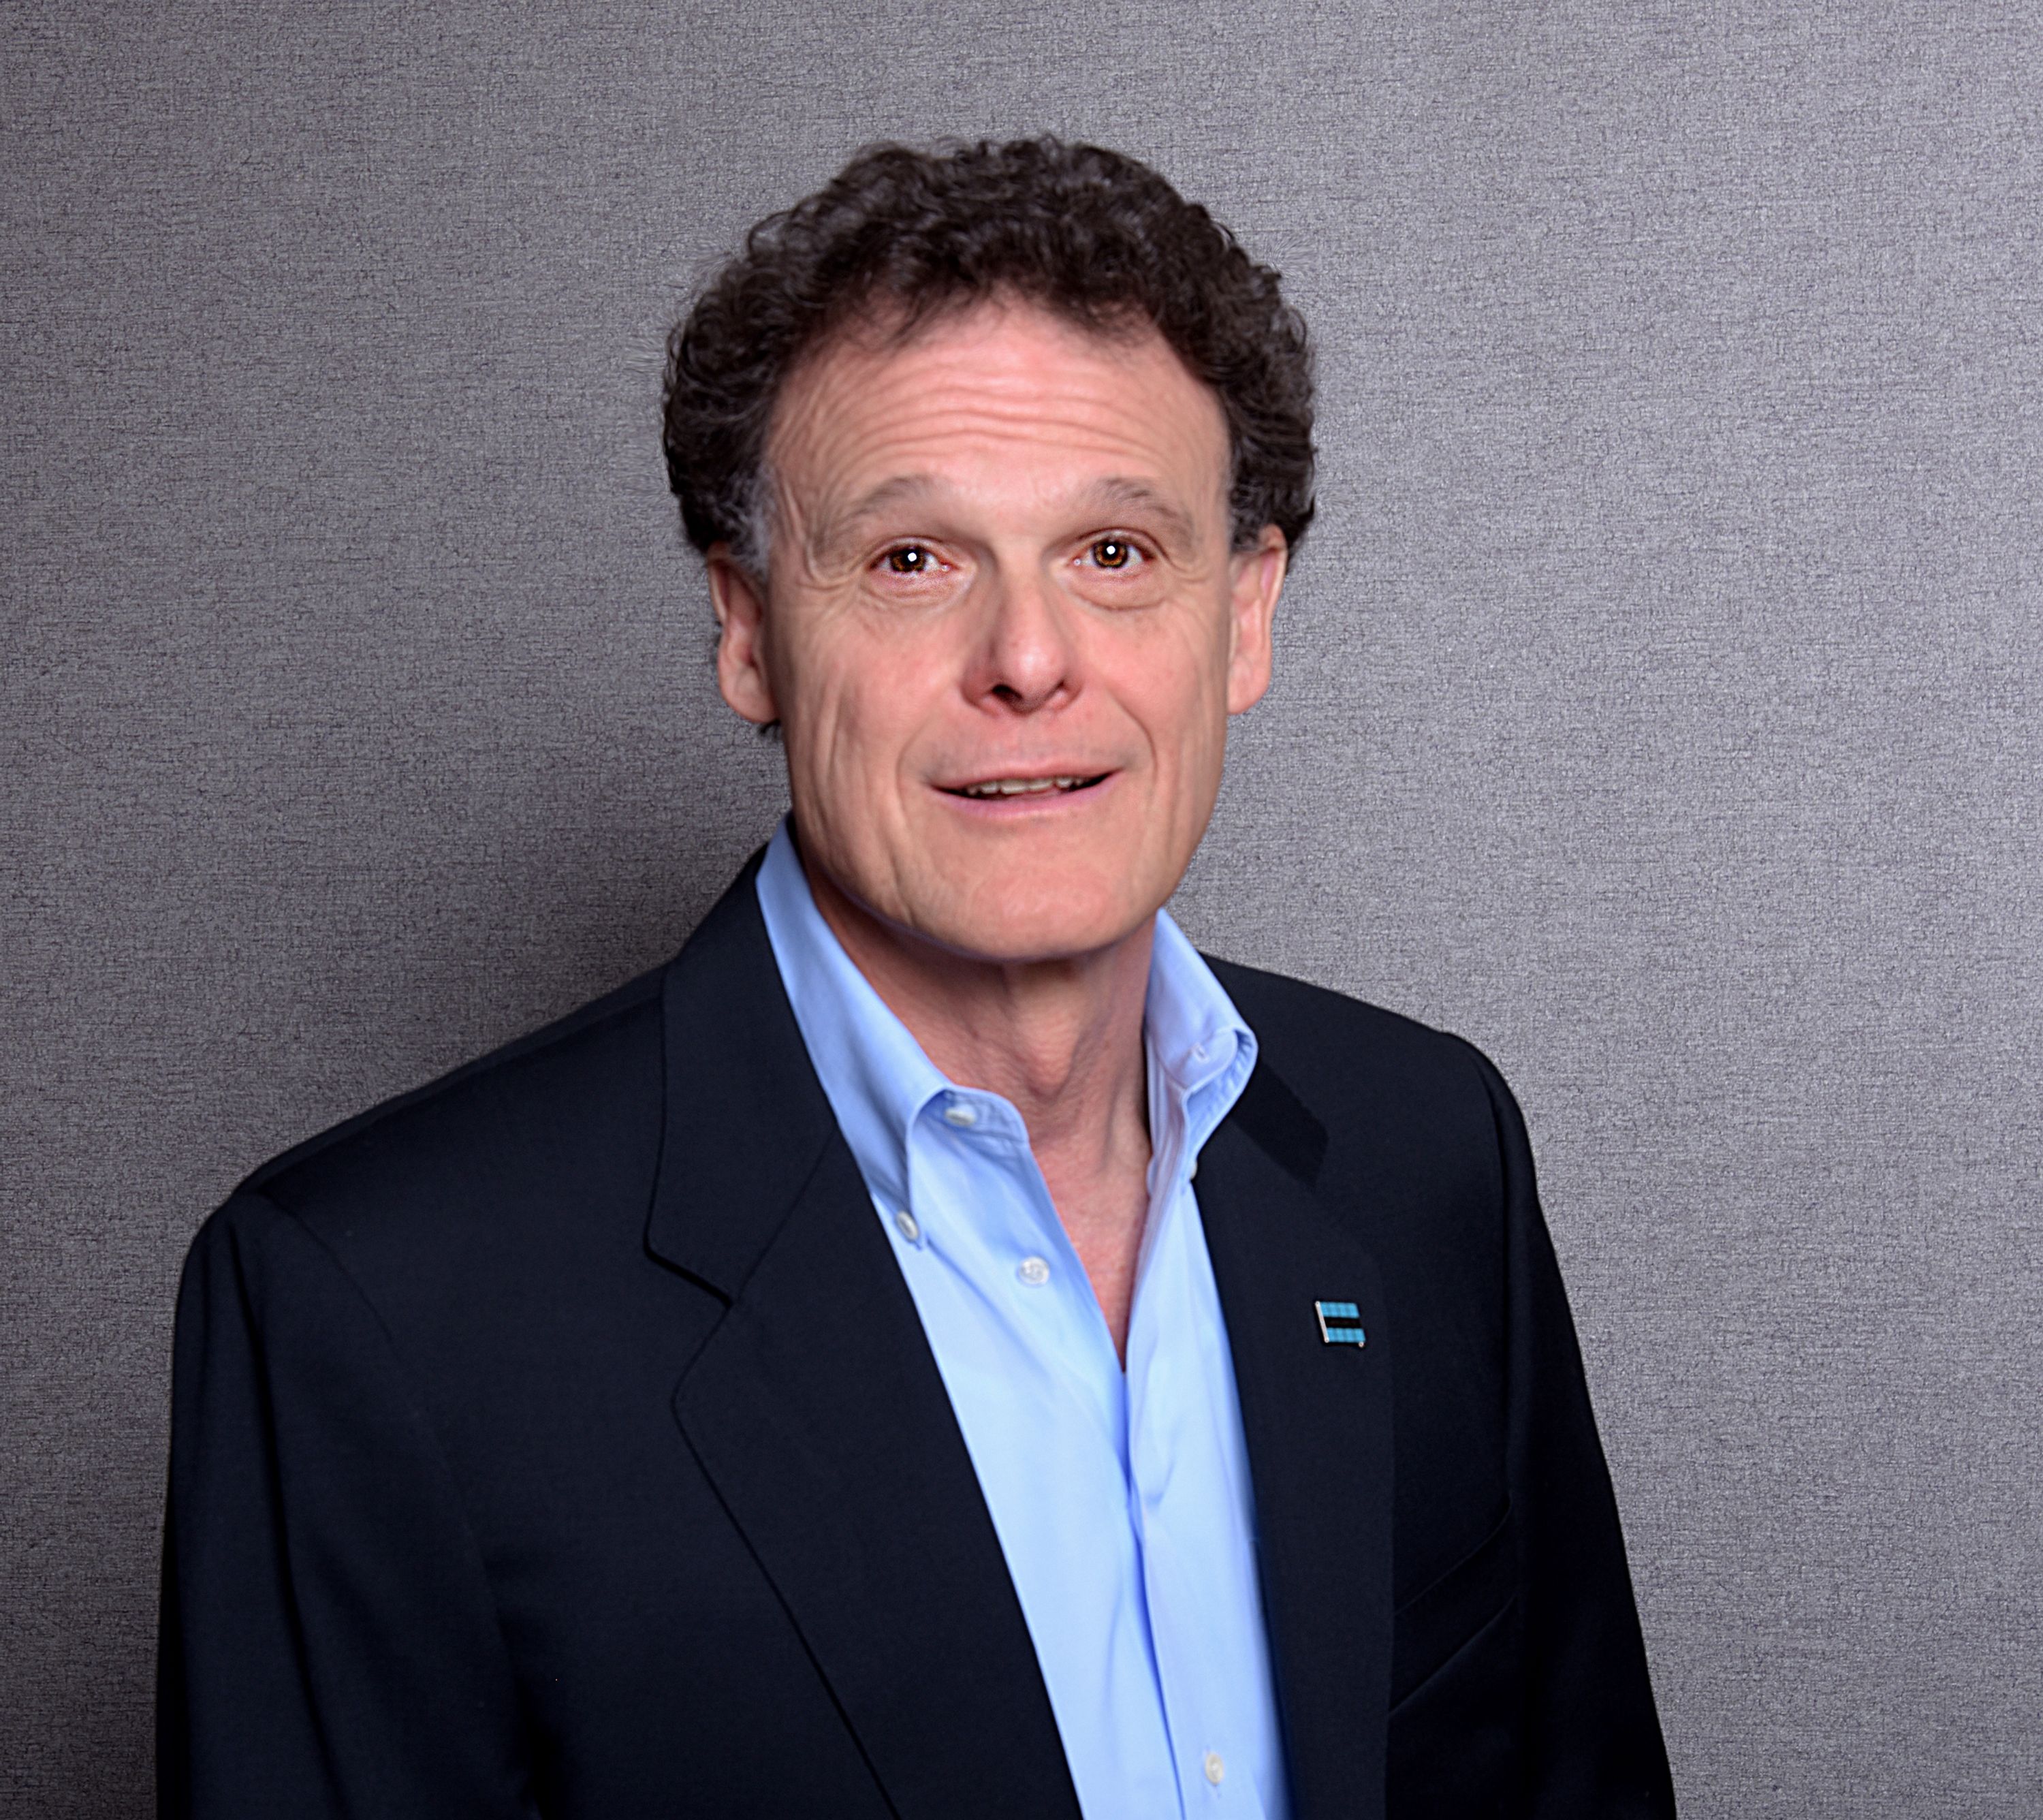 David Rothberg, chairman and ceo of laticrete